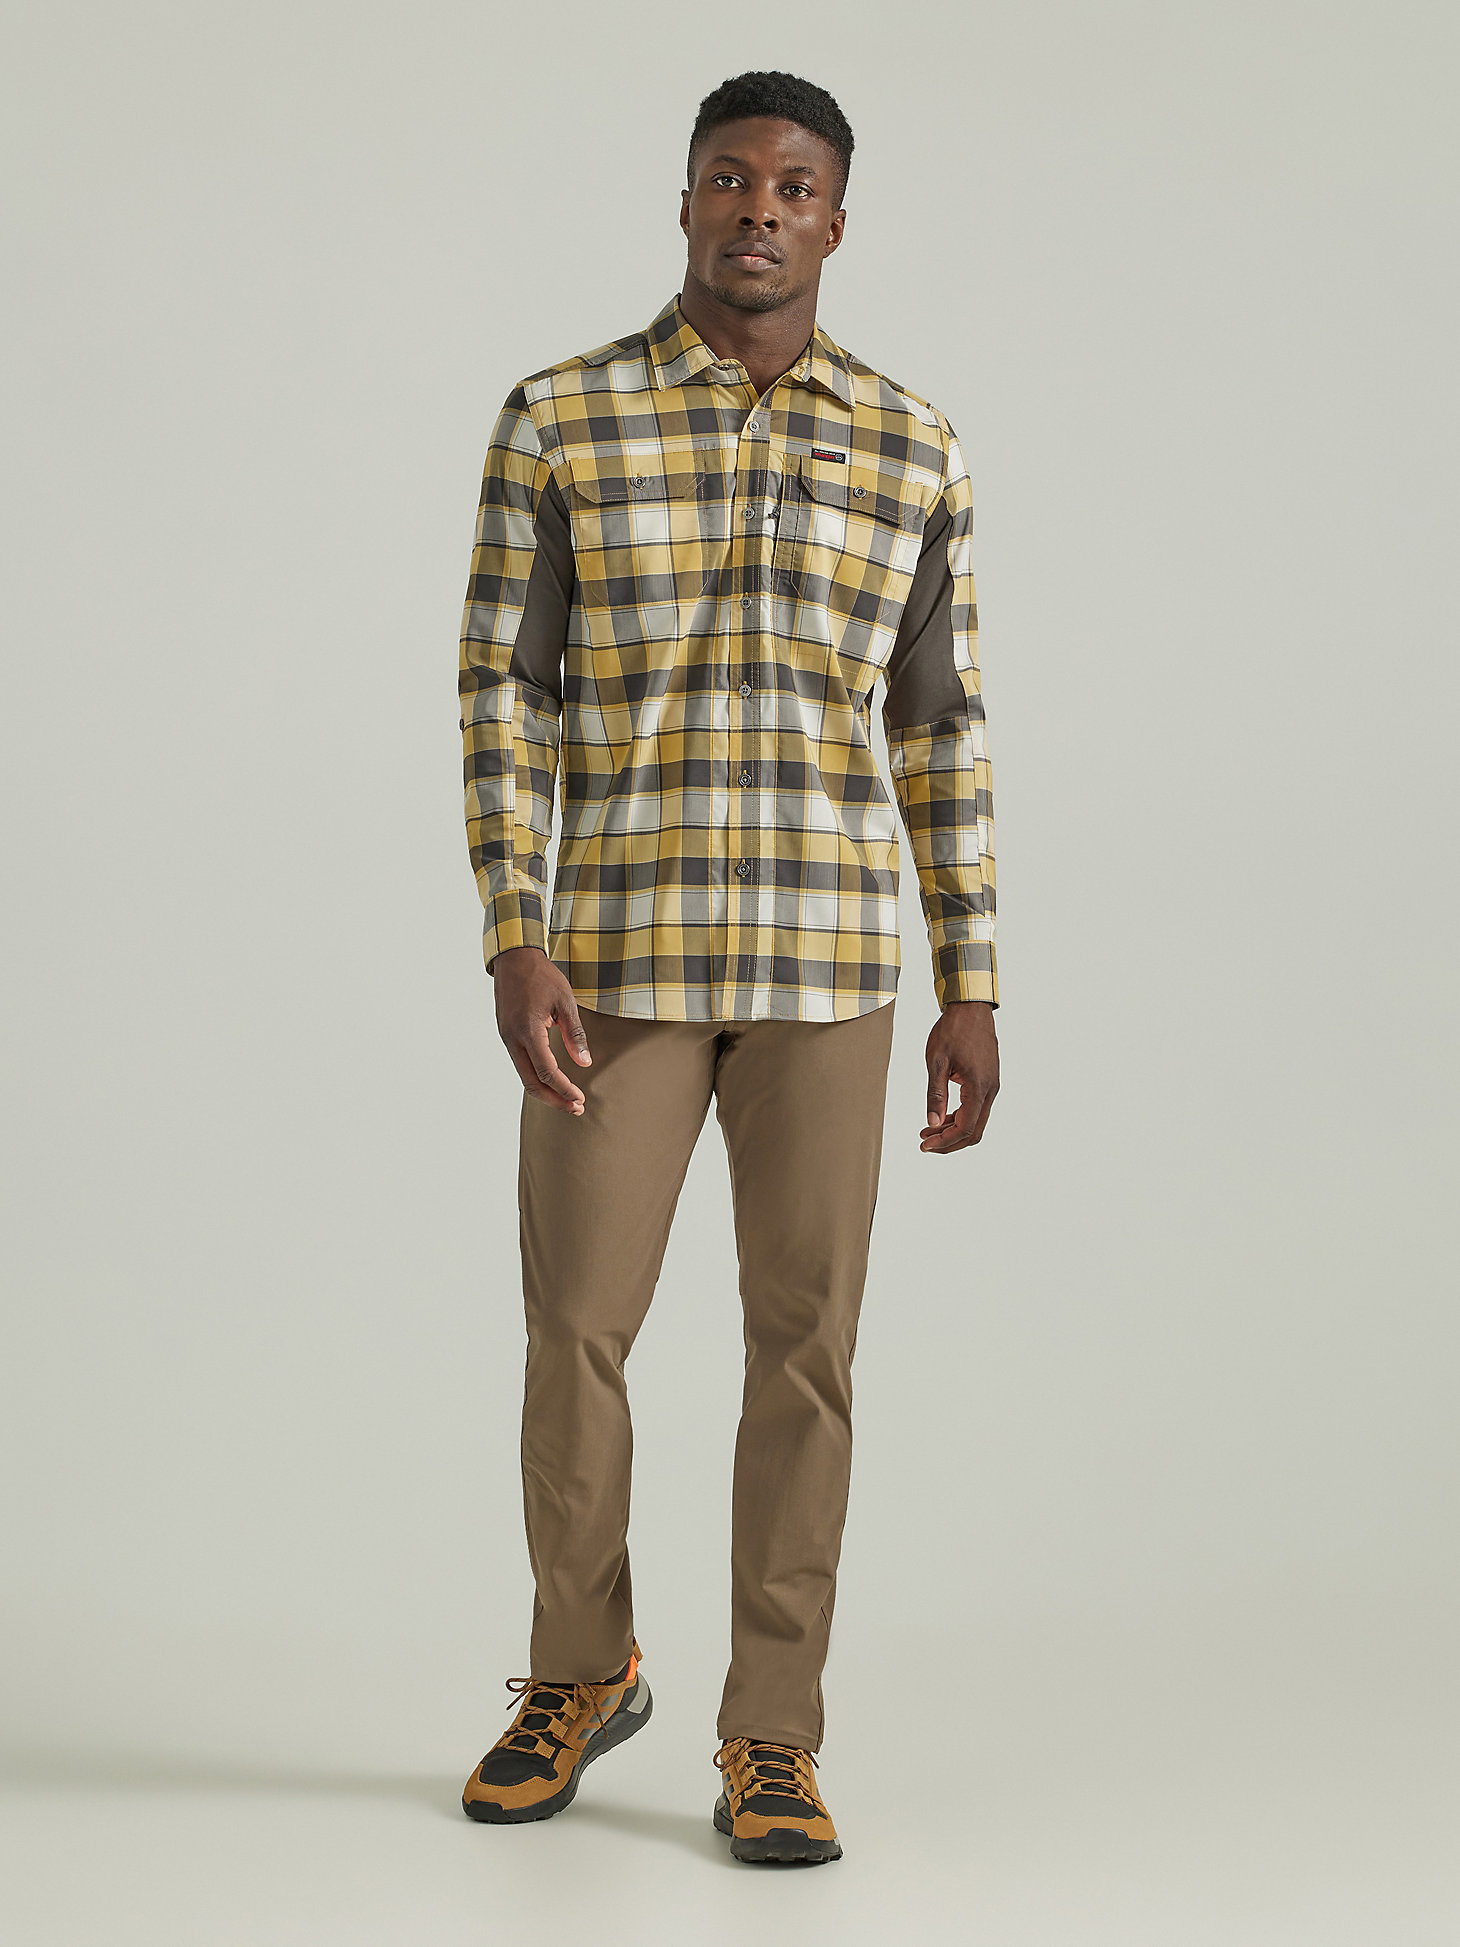 ATG By Wrangler™ Plaid Mixed Material Shirt in Travertine alternative view 1